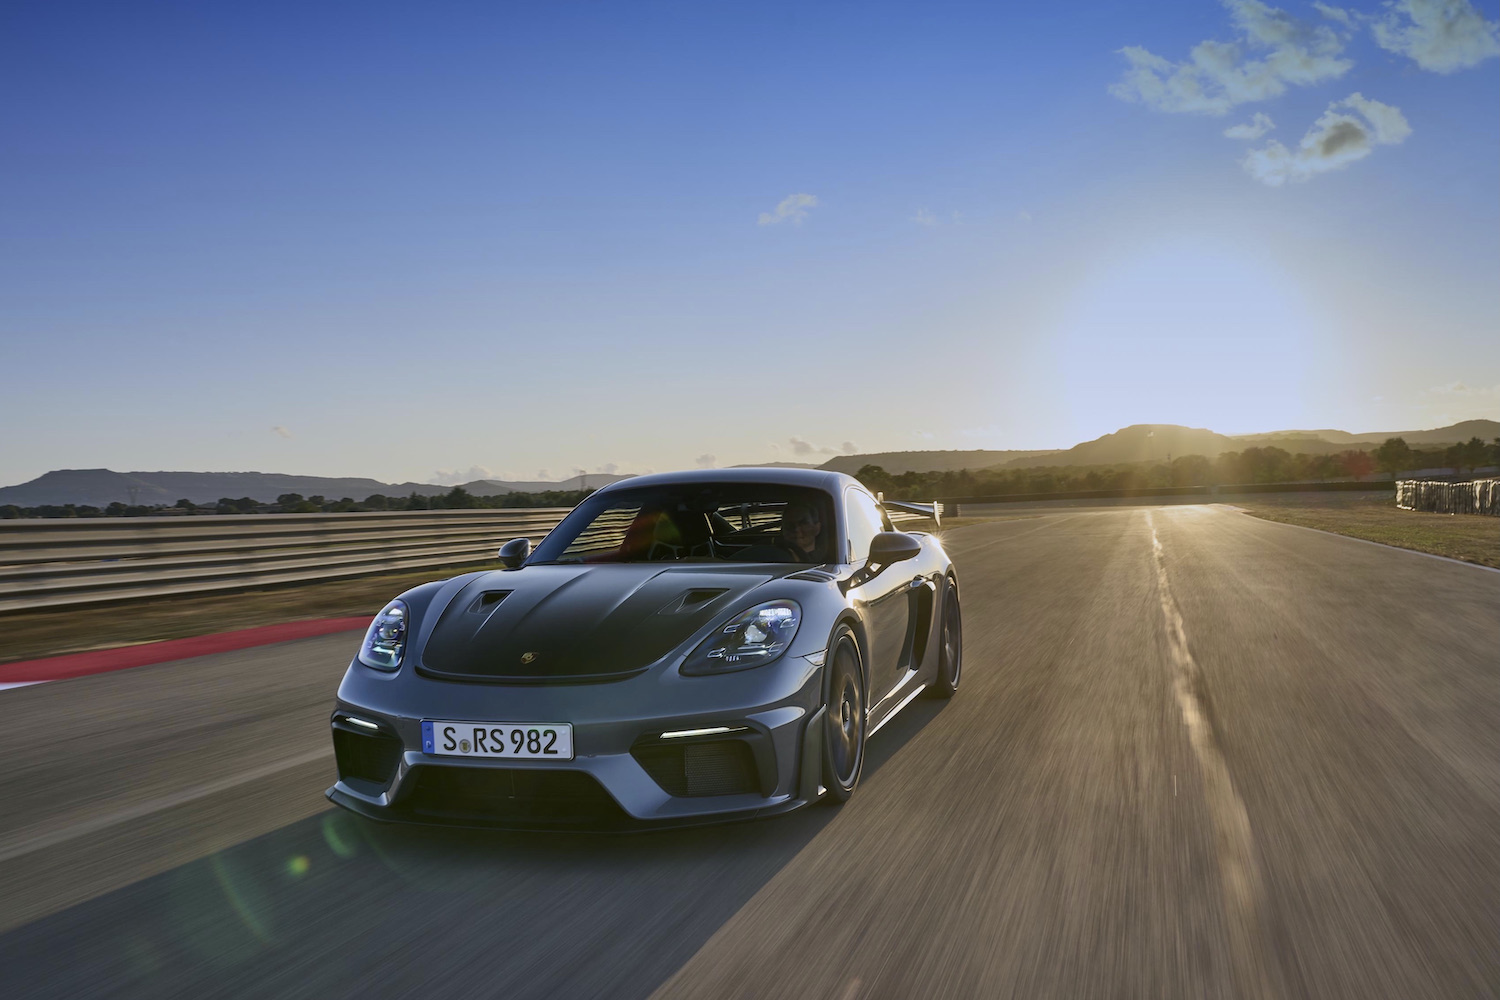 Porsche 718 Cayman GT4 RS front end angle from driver's side on track at sunset.